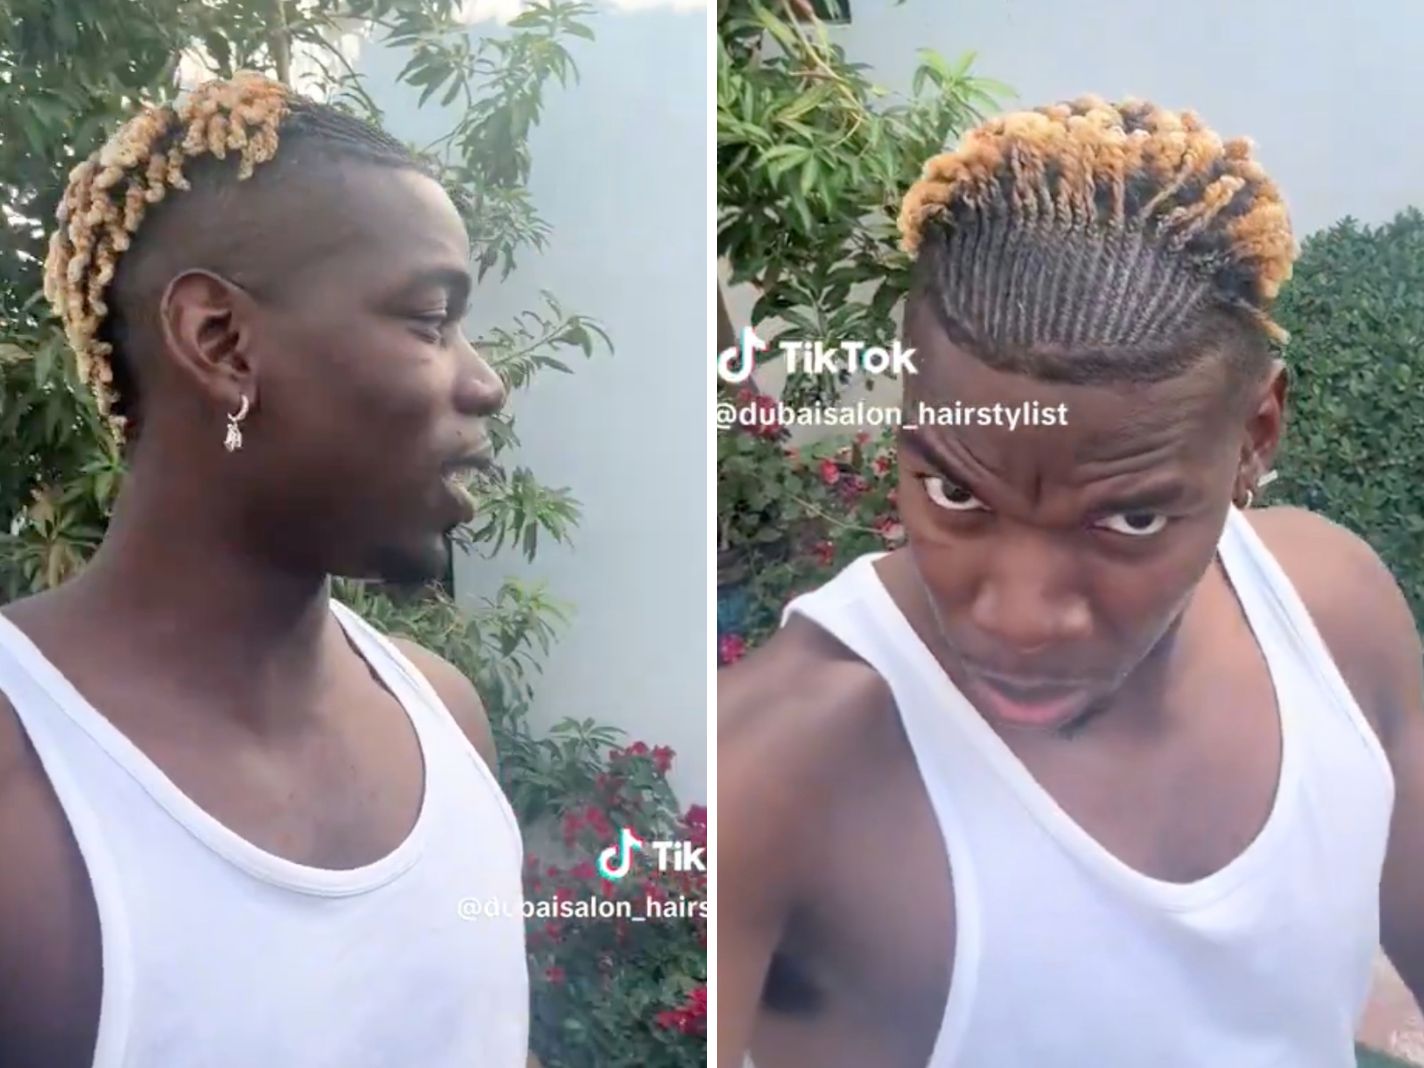 Twitter Roasts Paul Pogba Over New Hair Makeover: ‘Add Another 4 Years IMO’